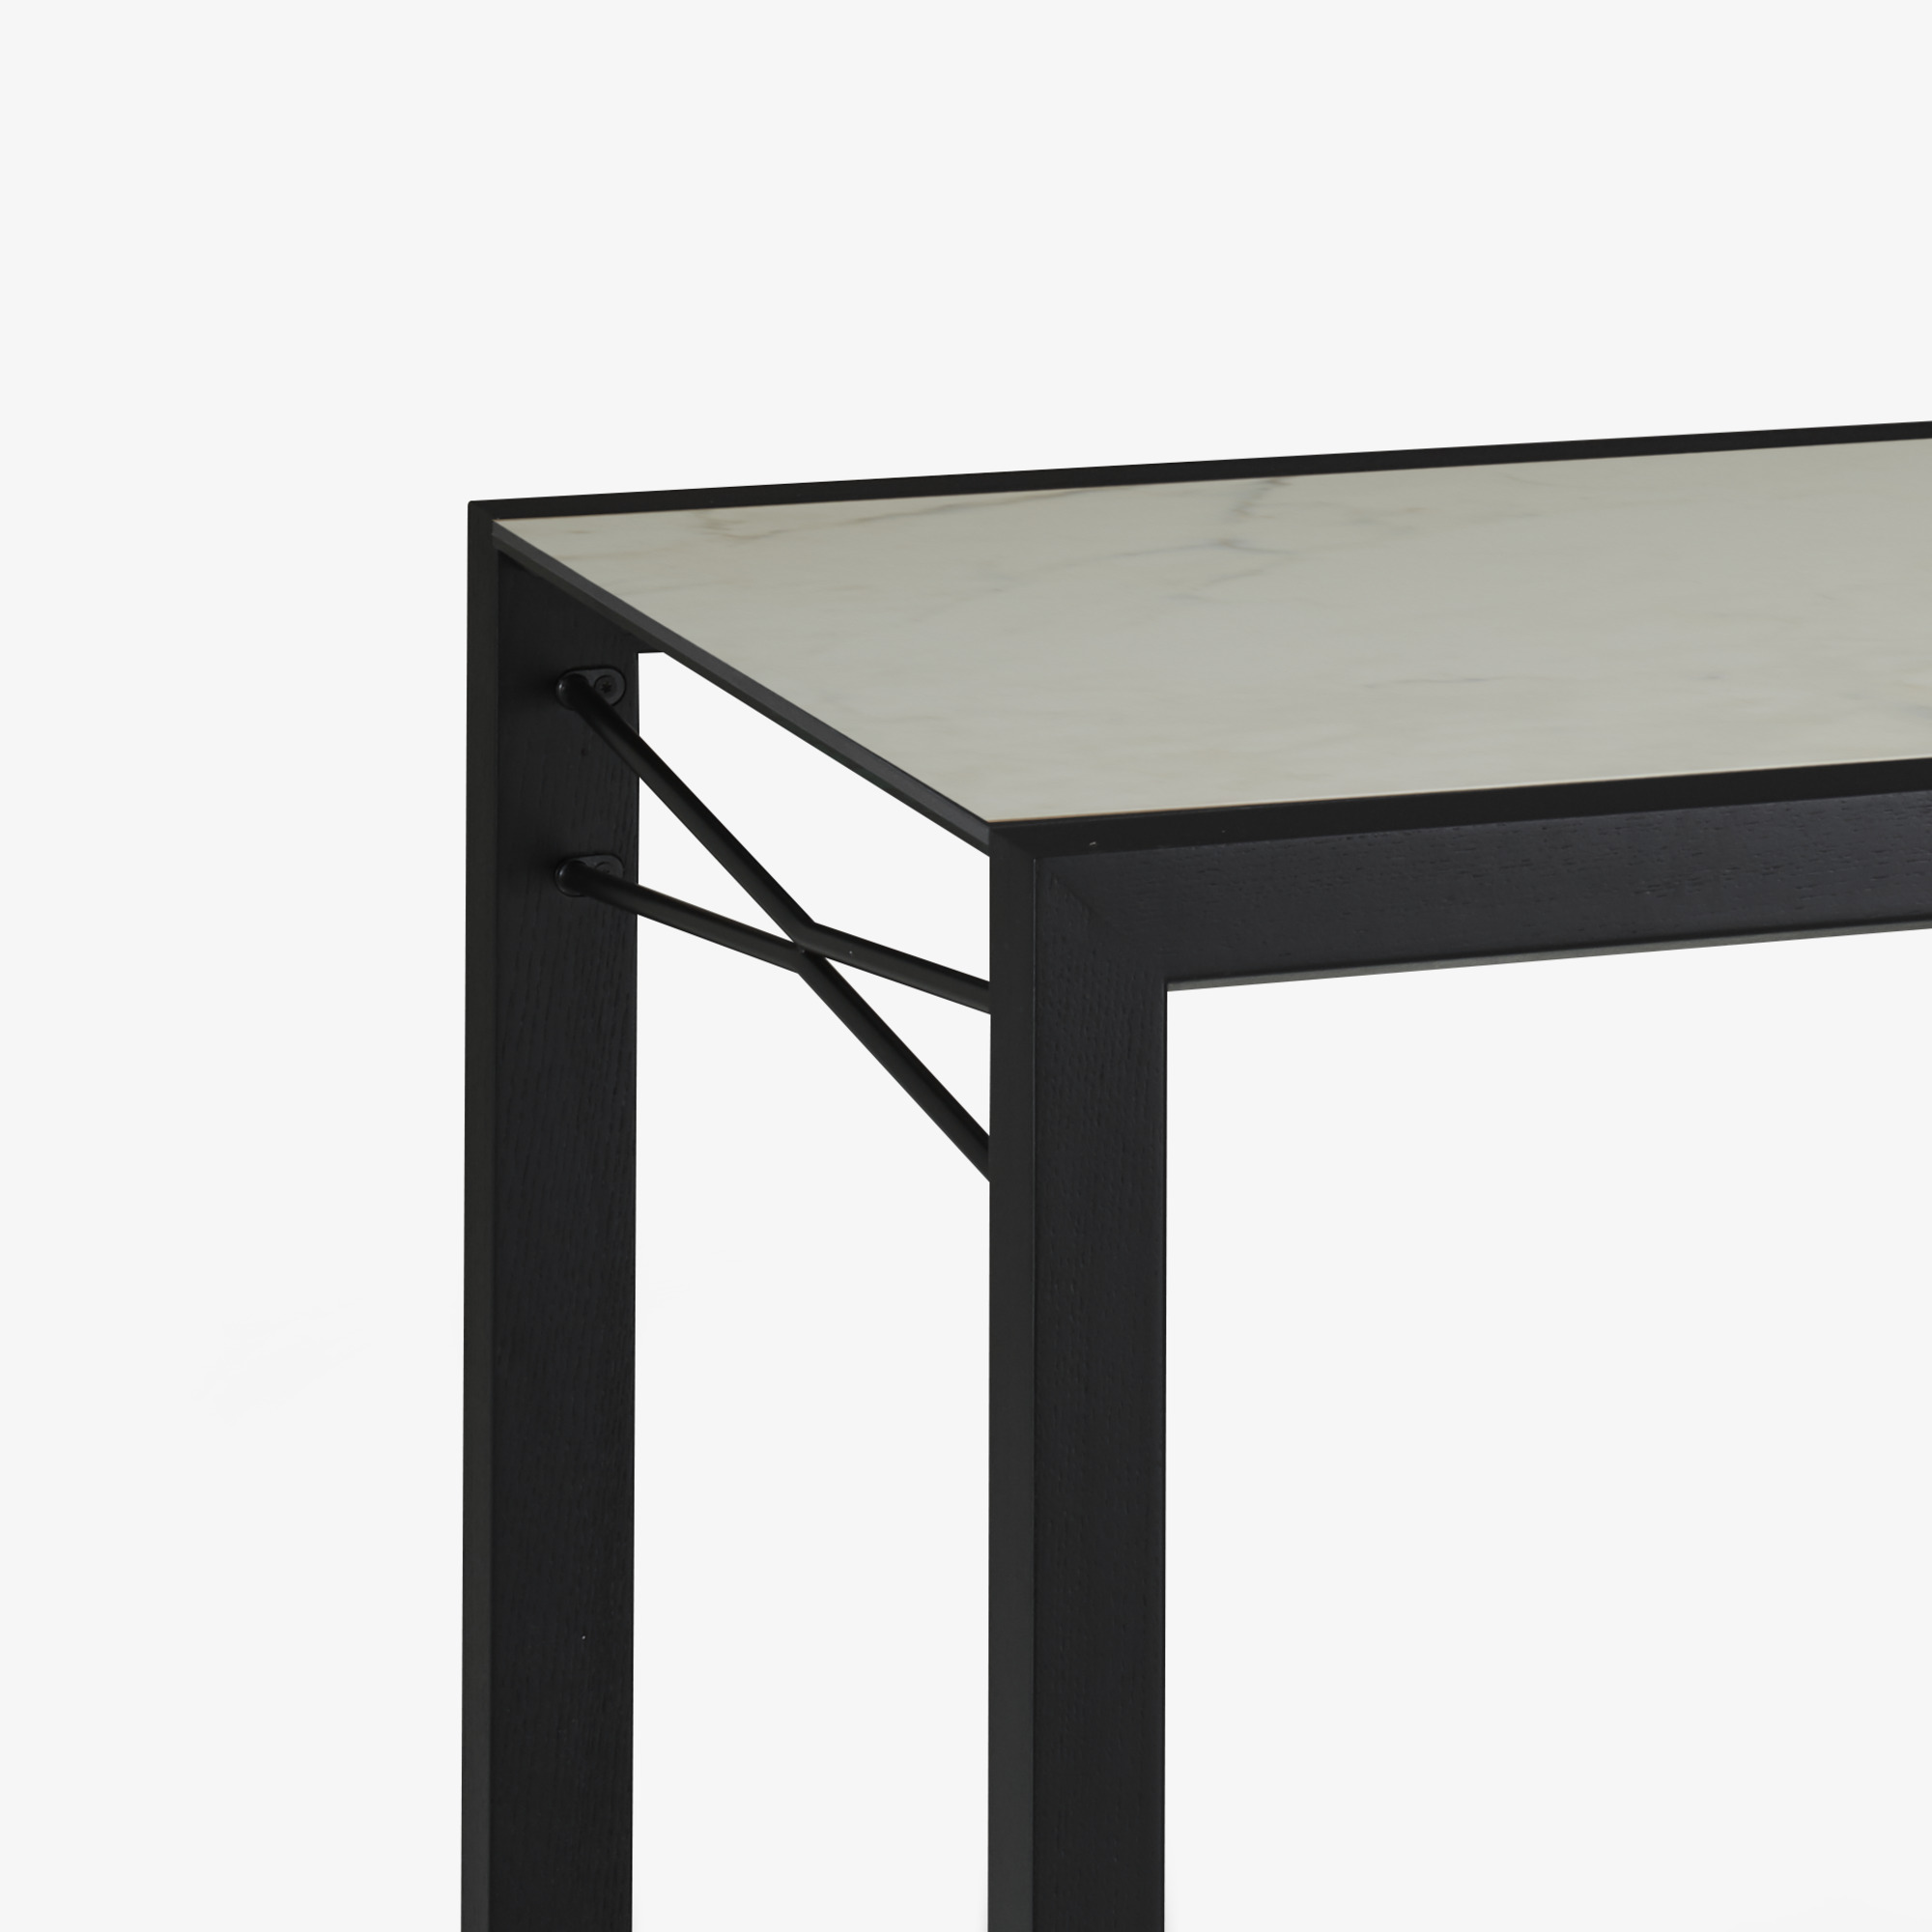 Image Dining table top in white marble-effect ceramic stoneware base in black stained ash 5